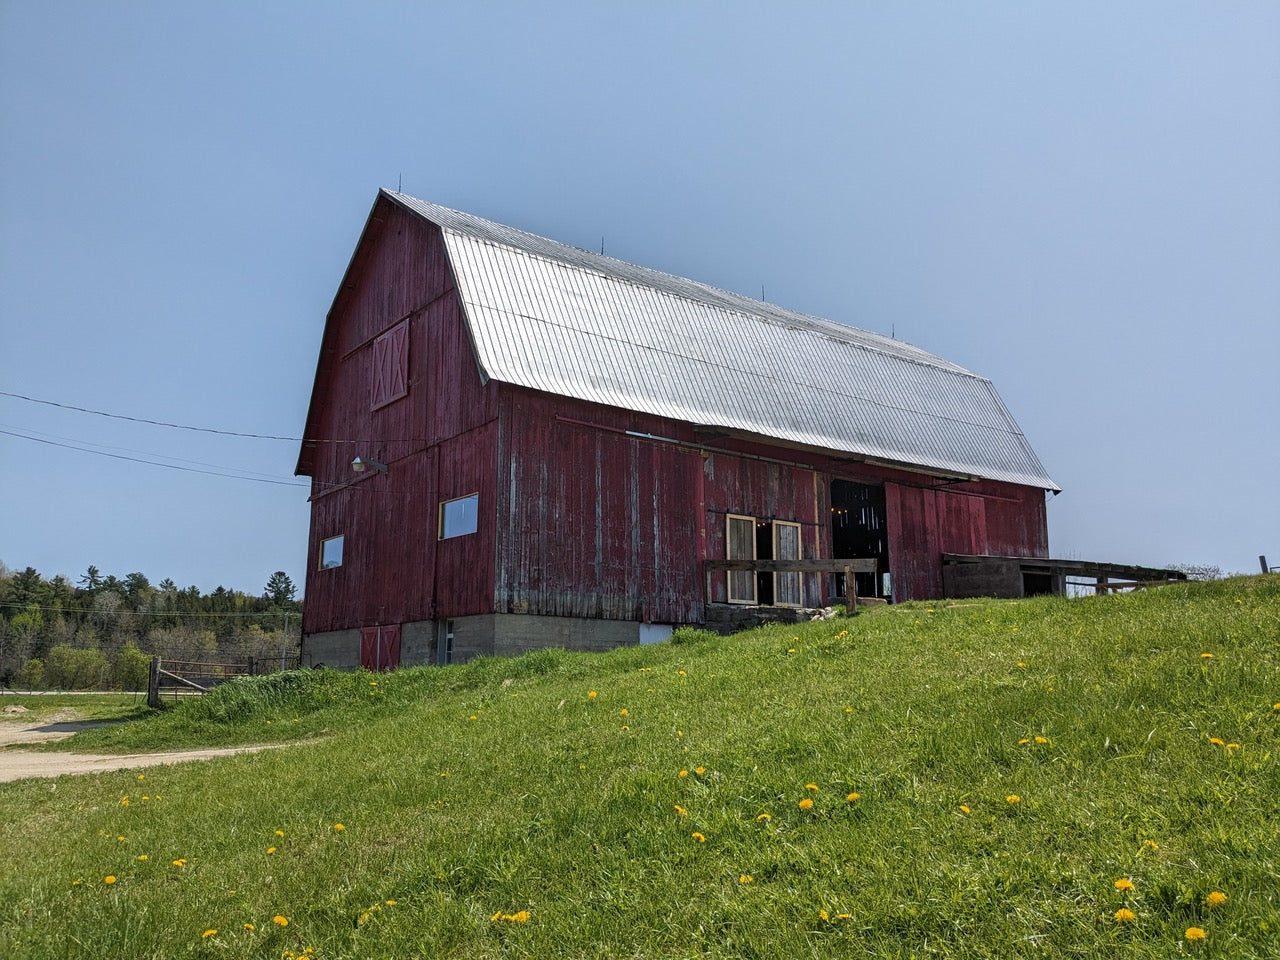 Yoga session, lunch and a farm hike - September 24